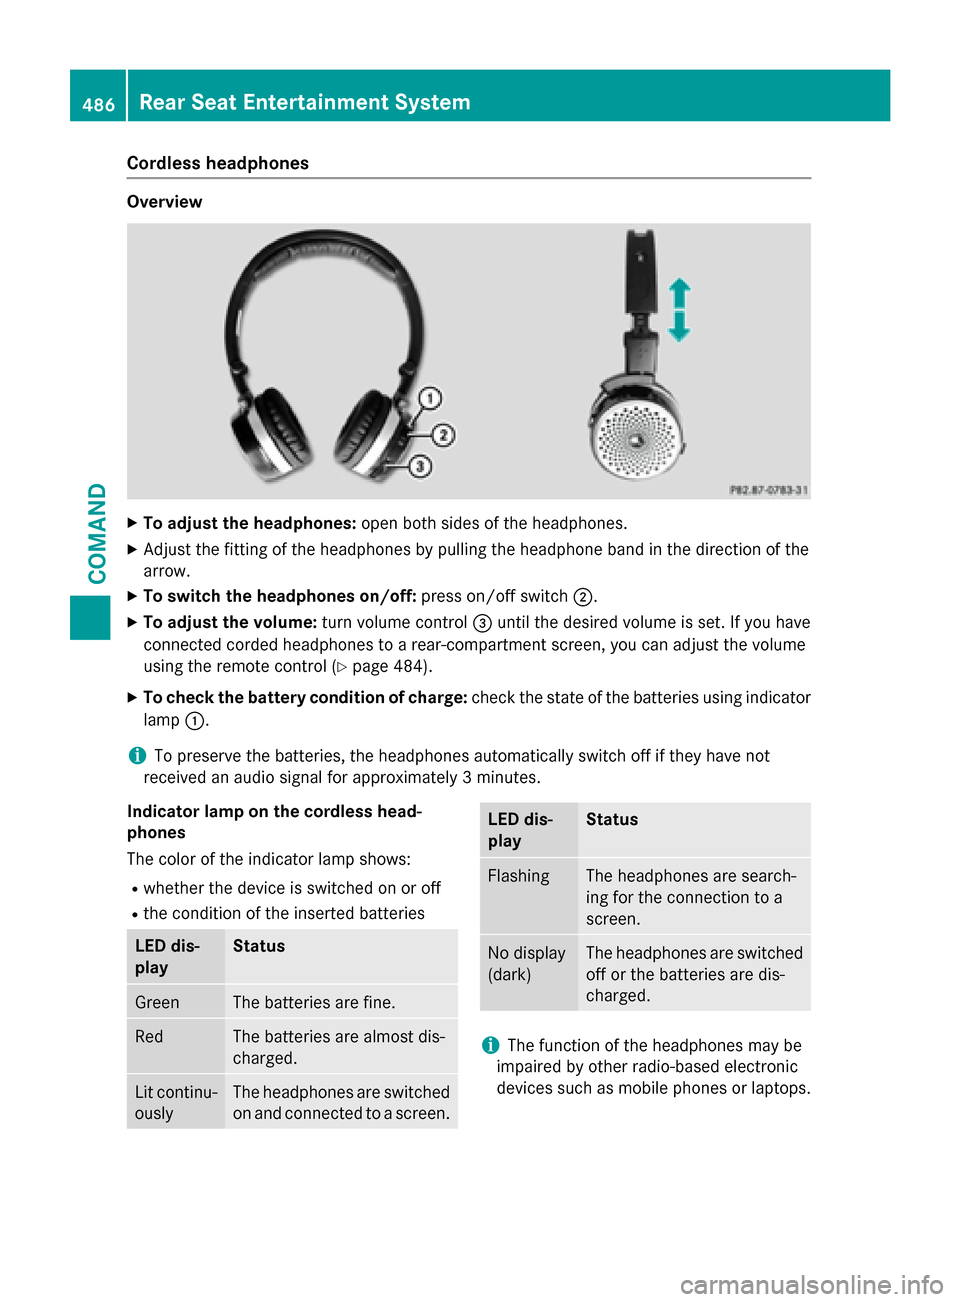 MERCEDES-BENZ SL-Class 2016 R231 Owners Manual Cordless headphones
Overview
XTo adjust the headphones:open both sides of the headphones.
XAdjust the fitting of the headphones by pulling the headphone band in the direction of the
arrow.
XTo switch 